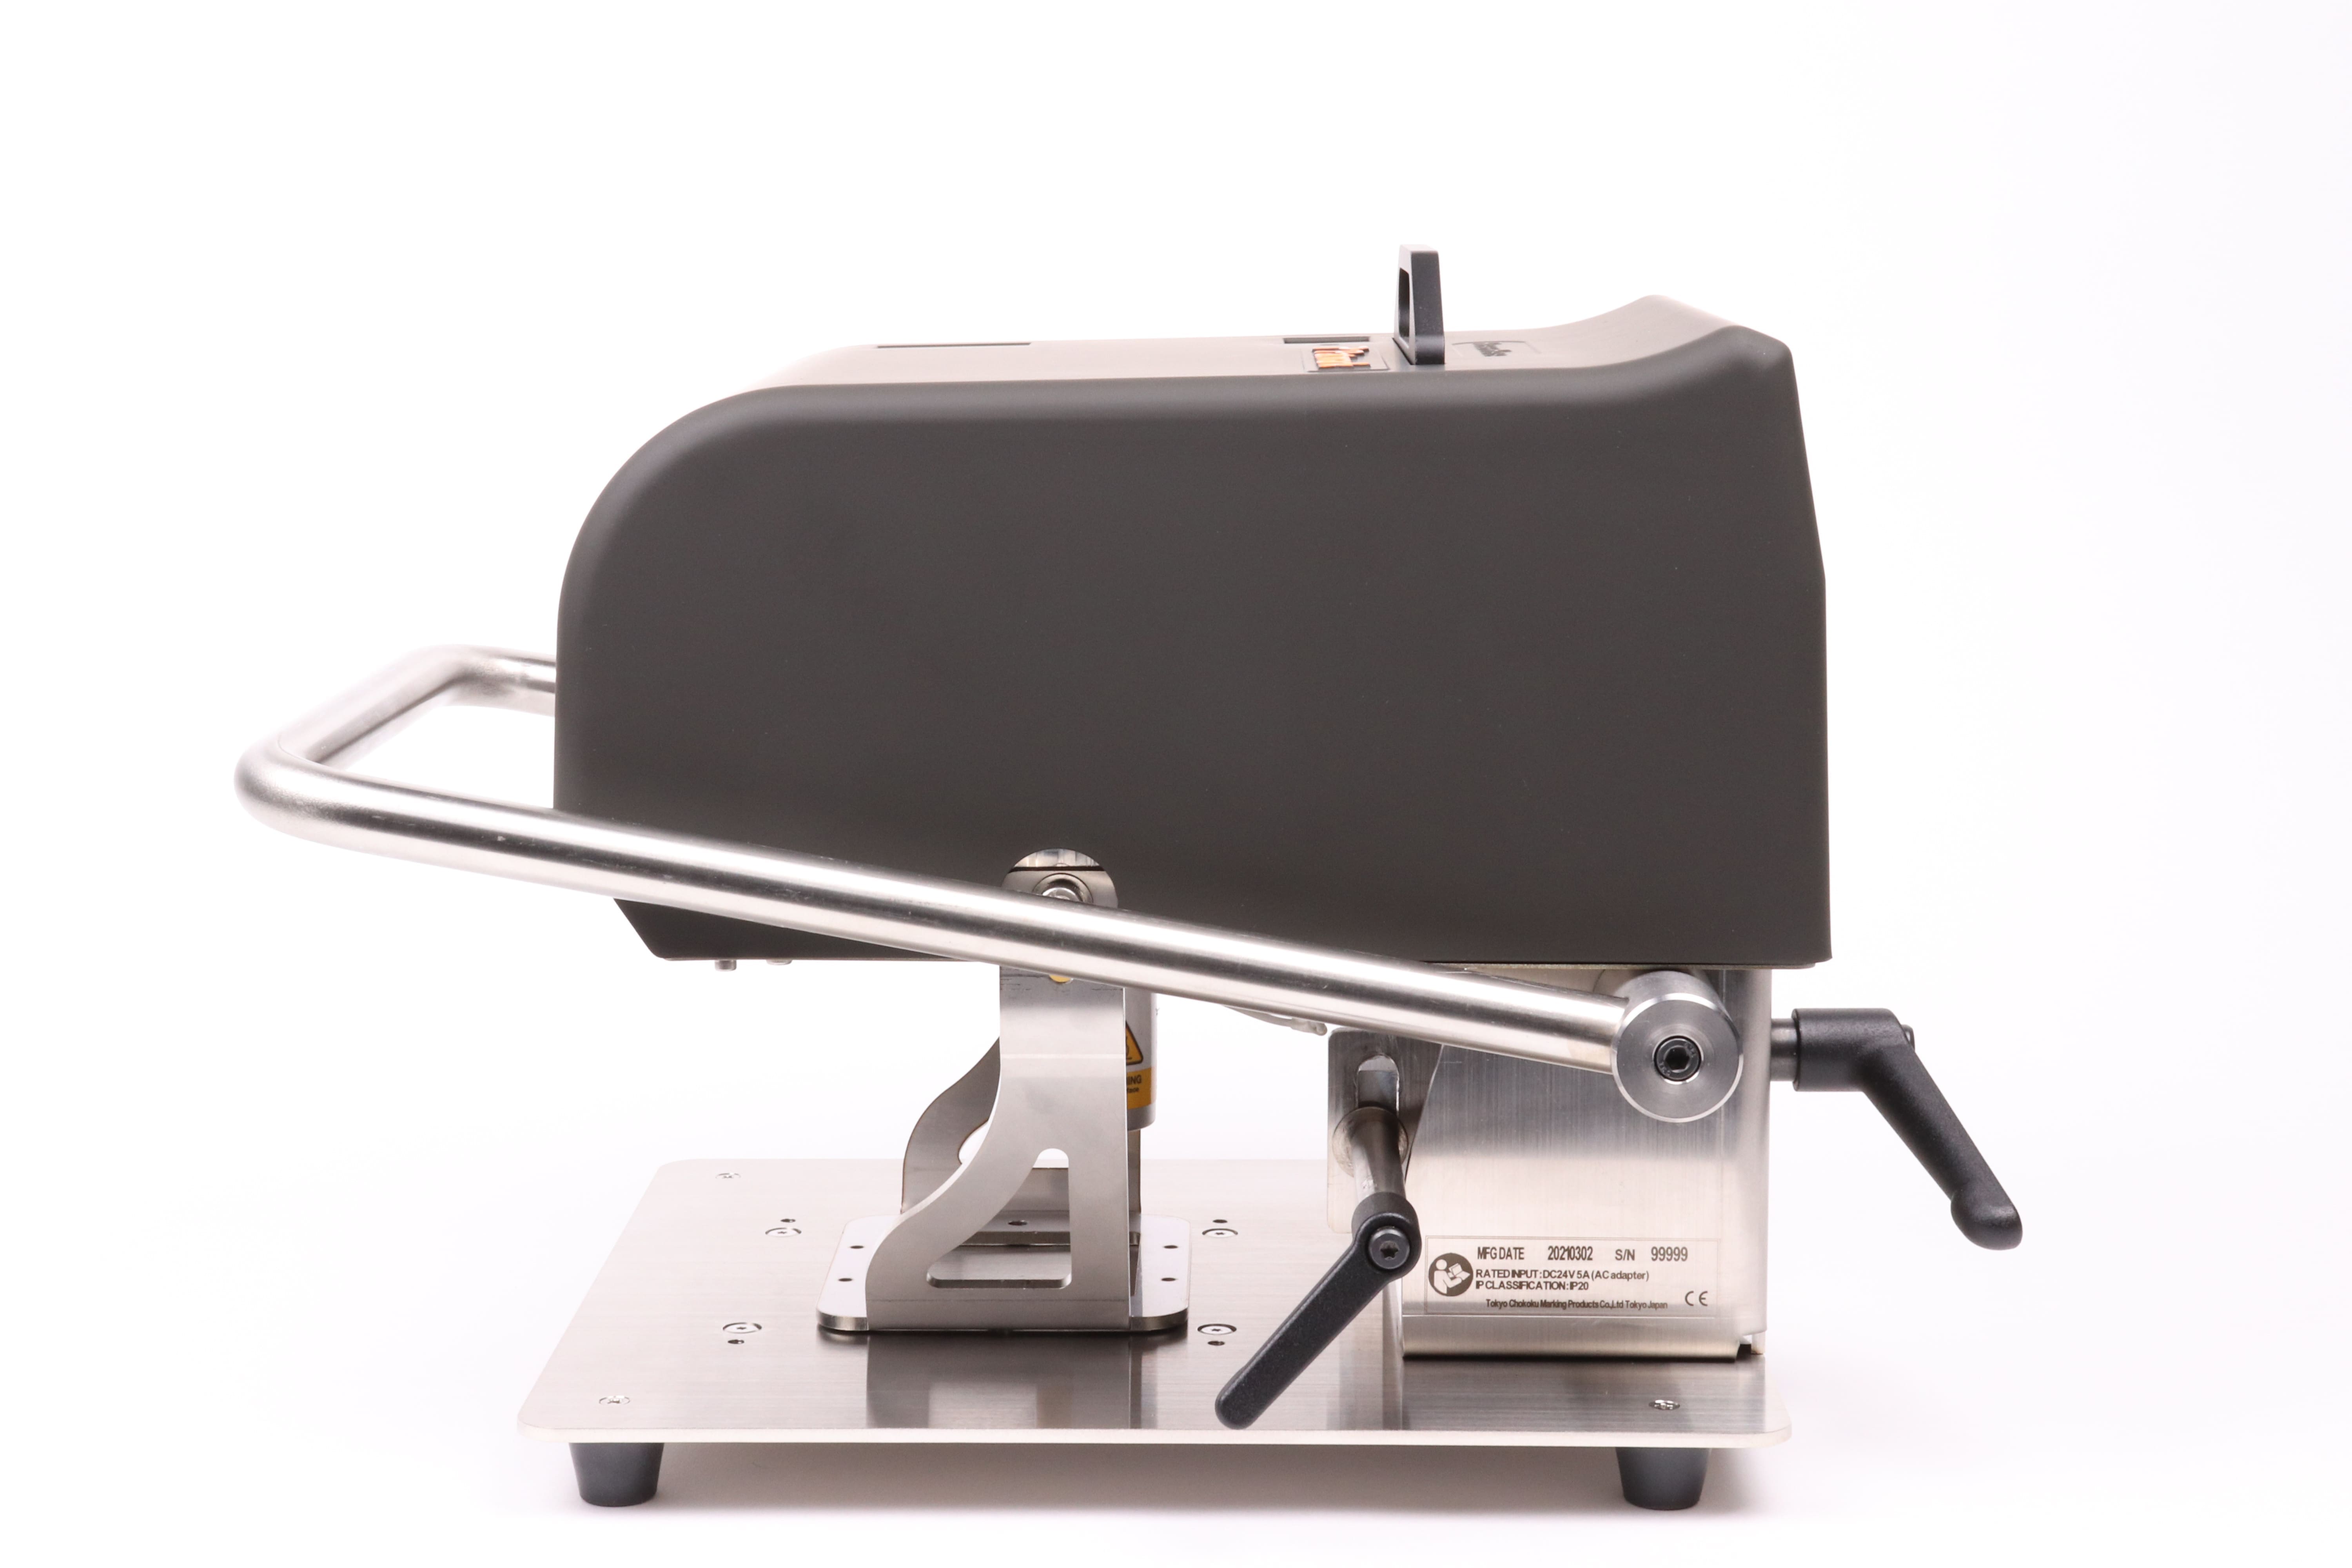 Image of the side view of the black Patmark-desktop unit from the Patmark series, with the fixation bar in the lowered position.